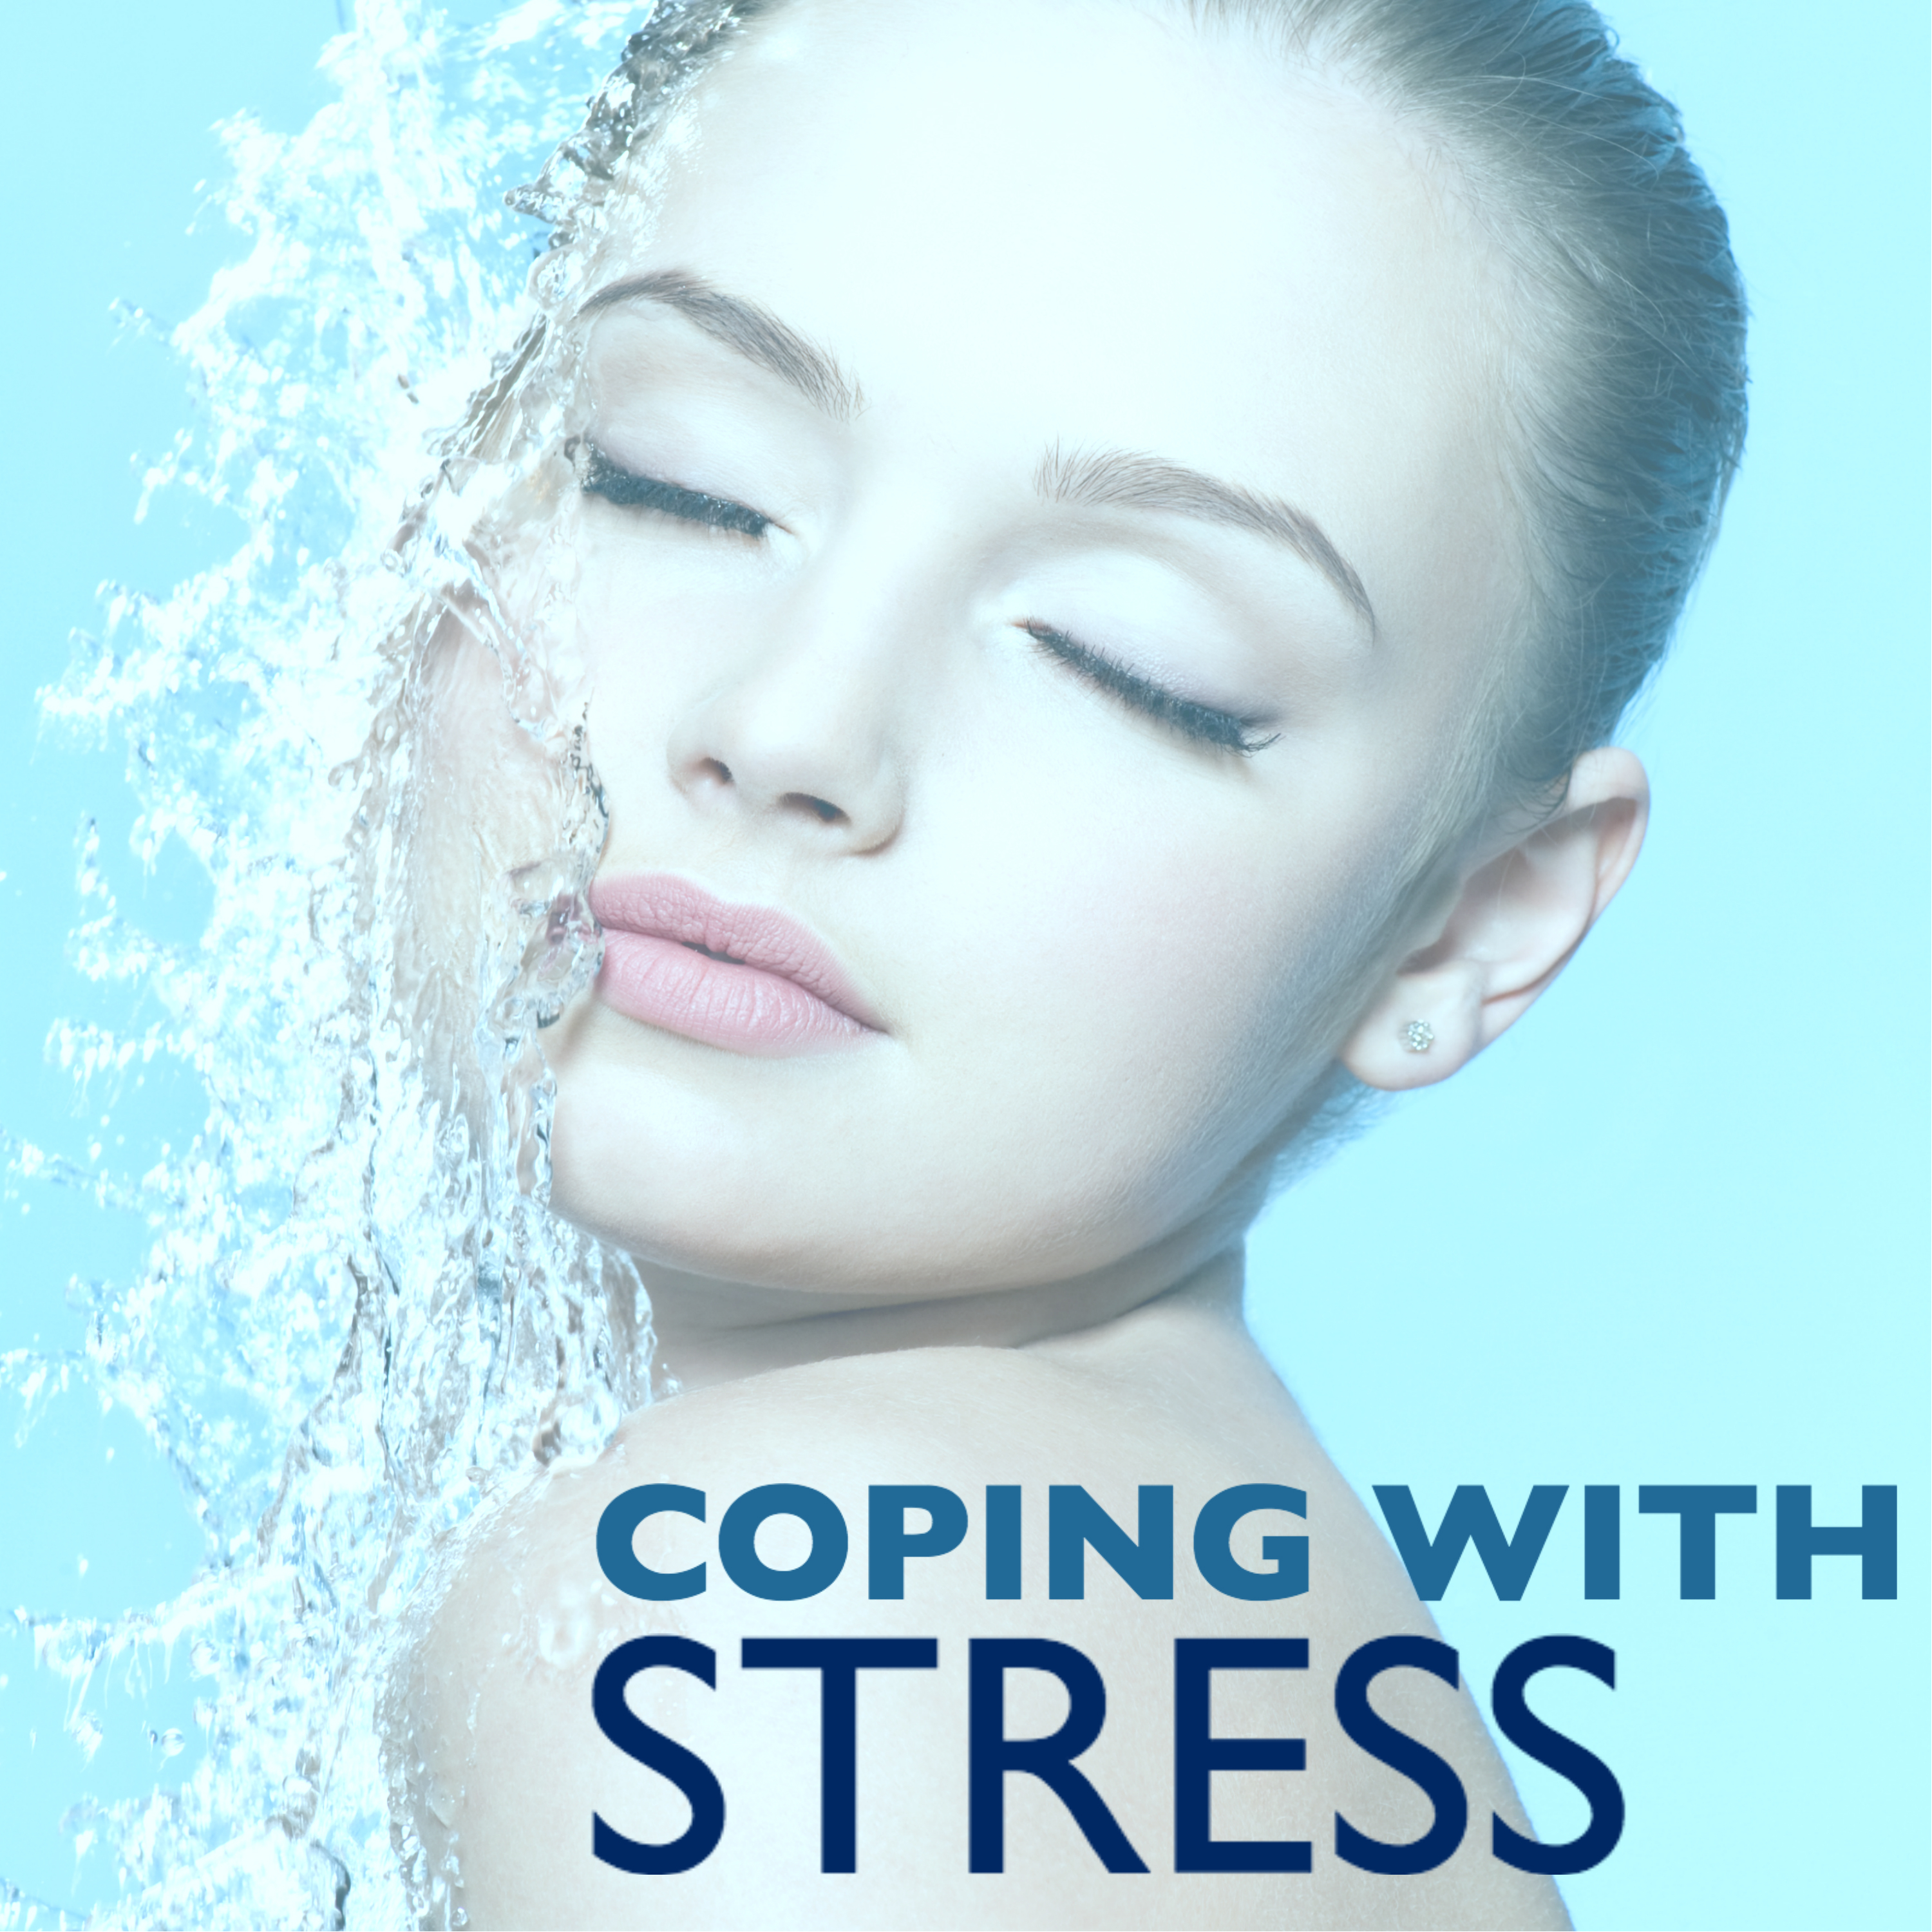 Coping with Stress - Ambient Music for Yoga Exercises, Single Moms Relaxation Therapy